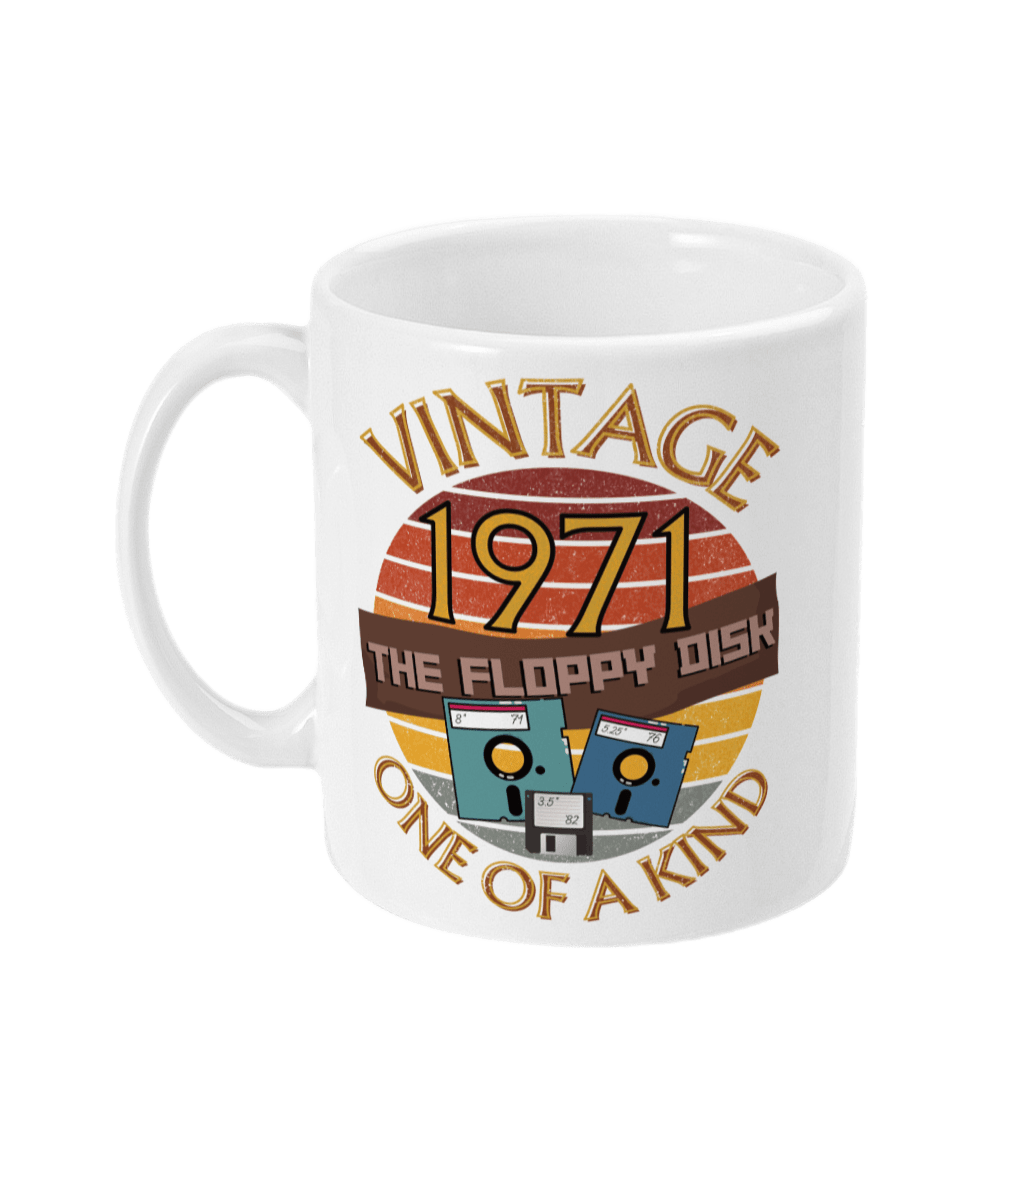 White mug with the words vintage,1971,the floppy disk ,one of a kind, 3 different types of floppy disk,8,5.25,3.5 inch